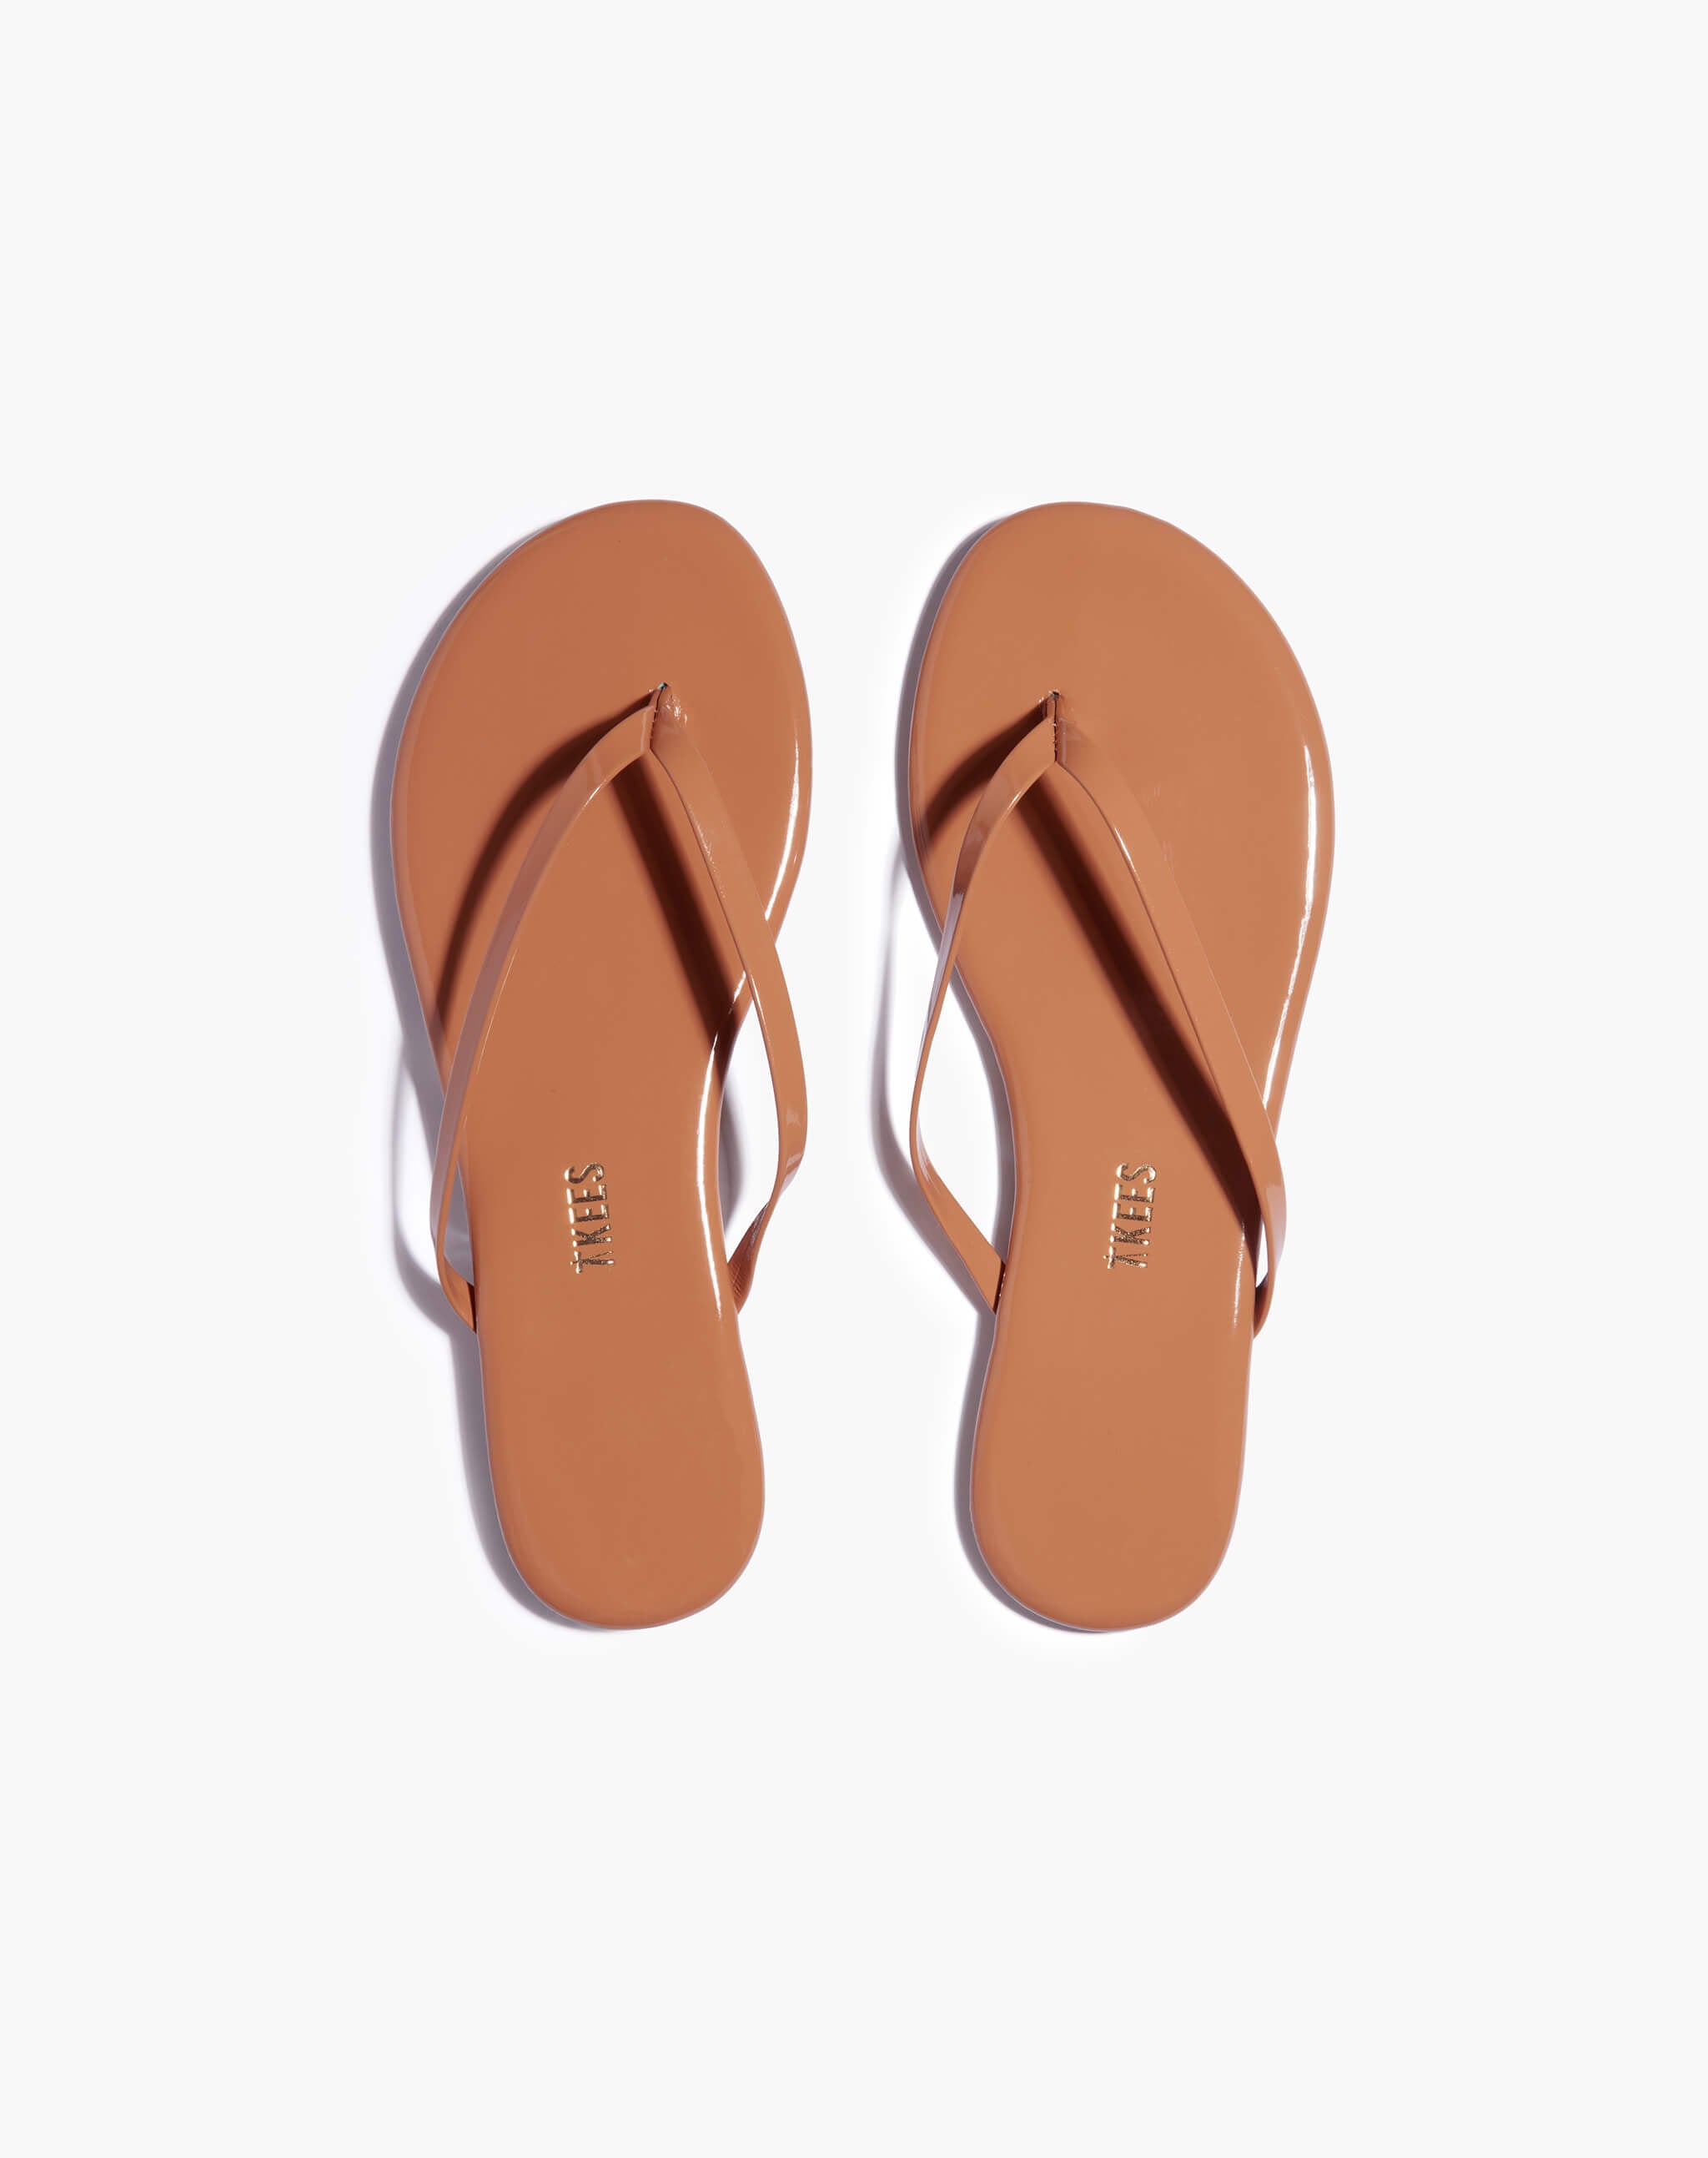 Lily Glosses in Sunbliss | Women's Sandals | TKEES – TKEES